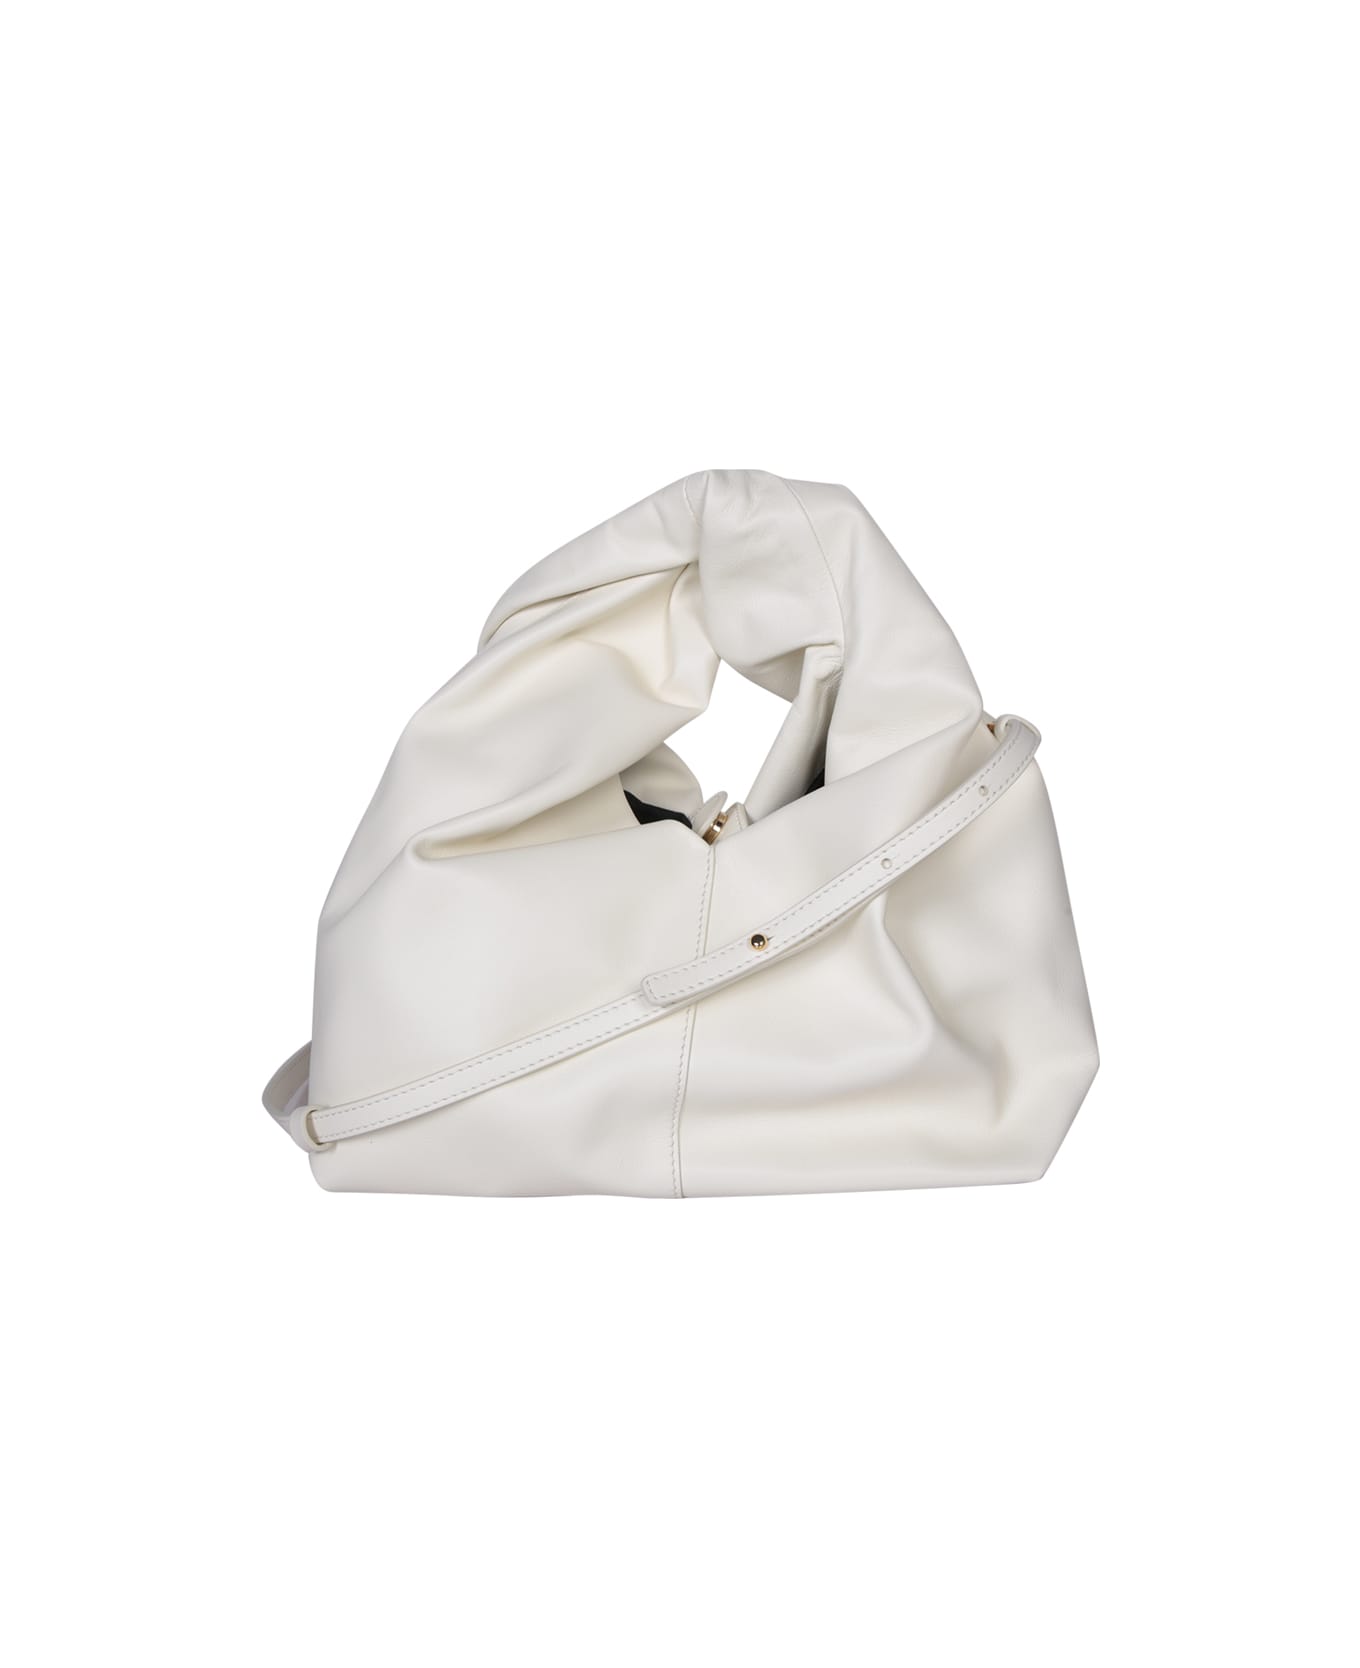 J.W. Anderson White Leather Hobo Twister Bag - OFFWHITE